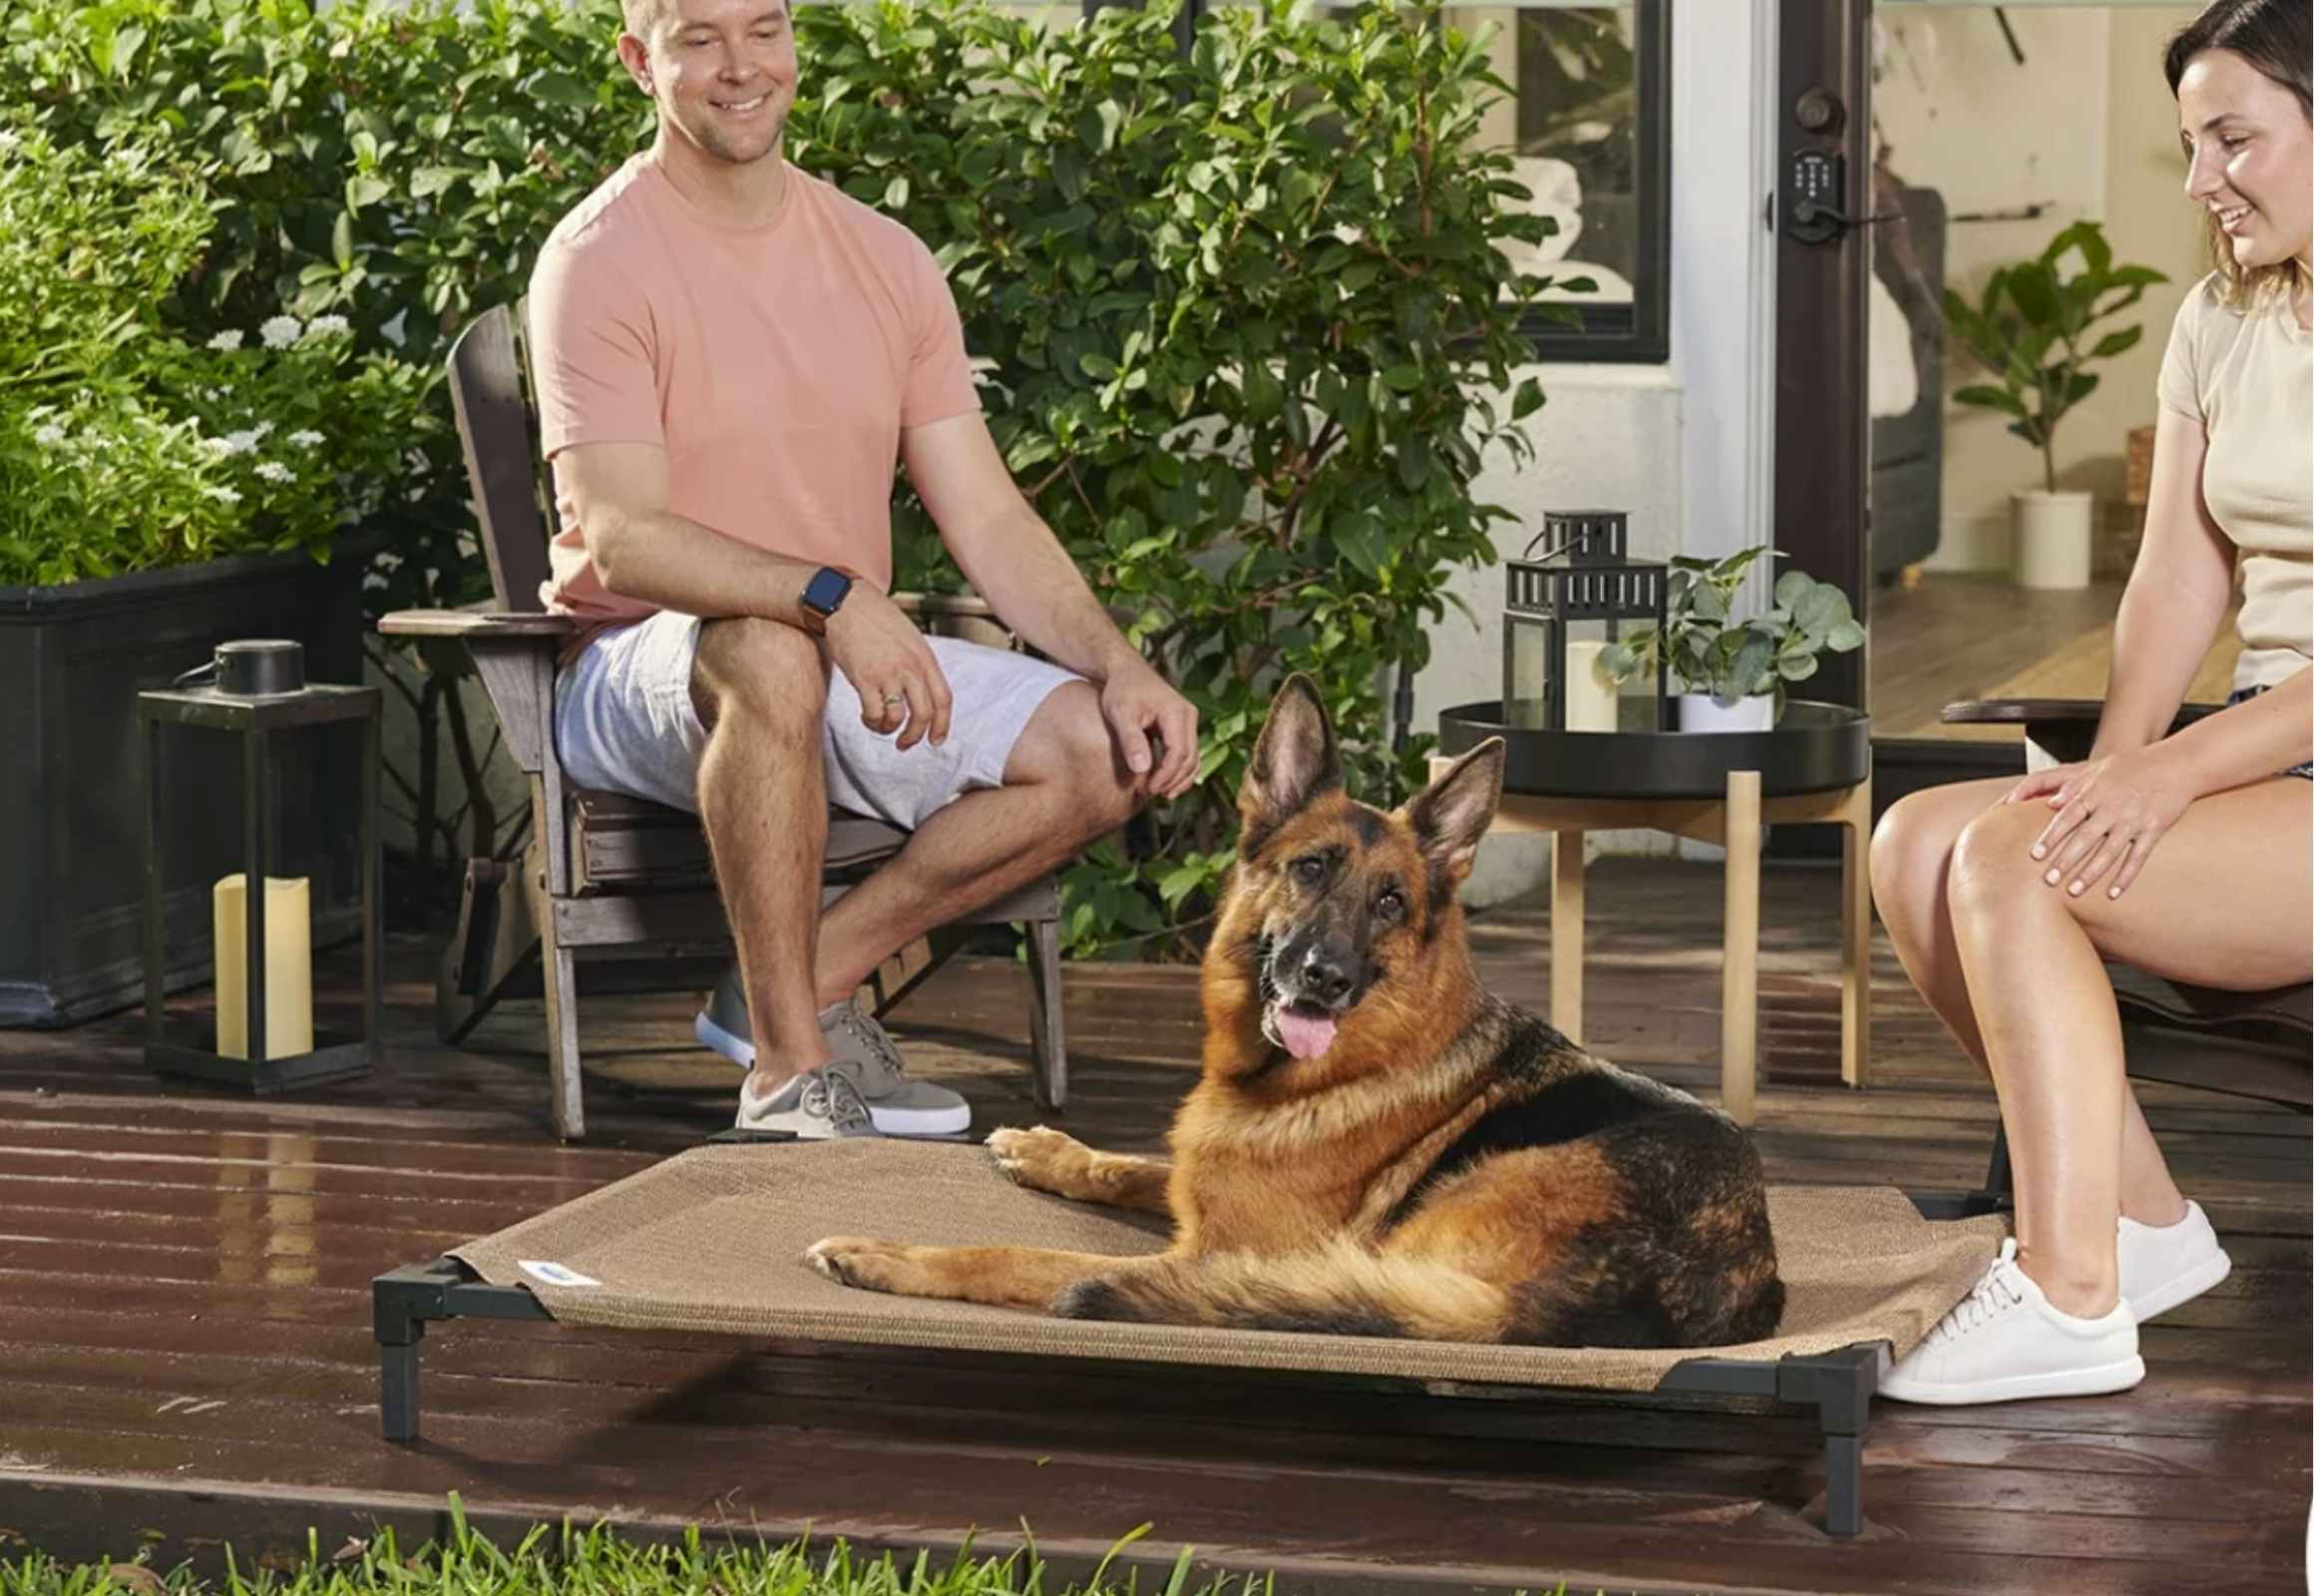 Elevated Dog Bed Clearance: Starting at Only $16 at Walmart